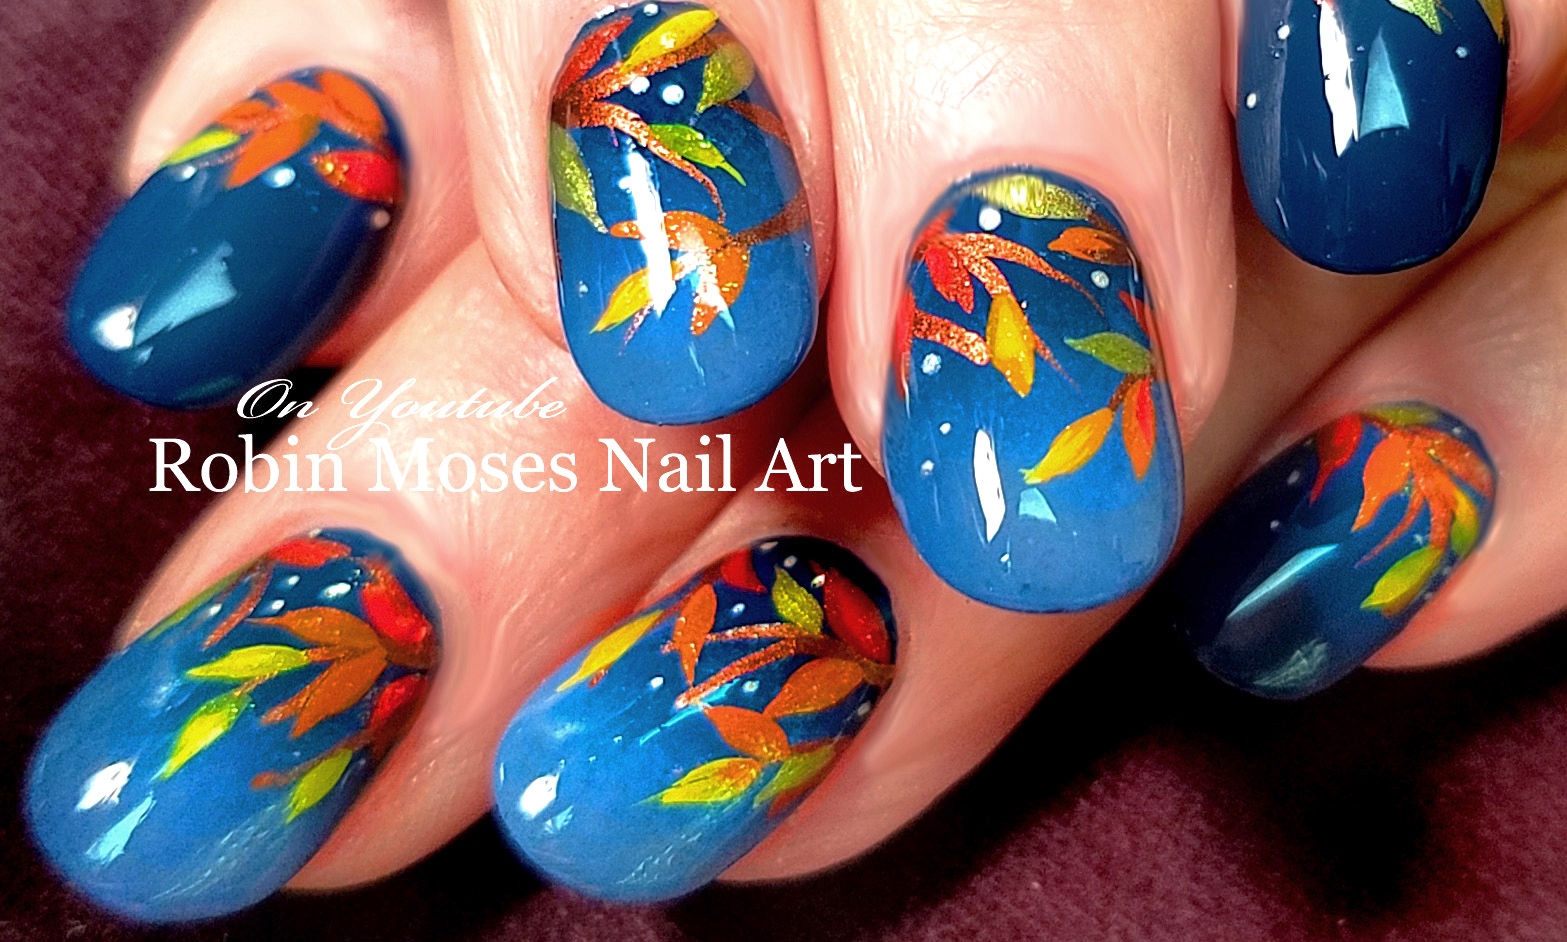 Robin Moses Nail Art Fan Page - Home - wide 8